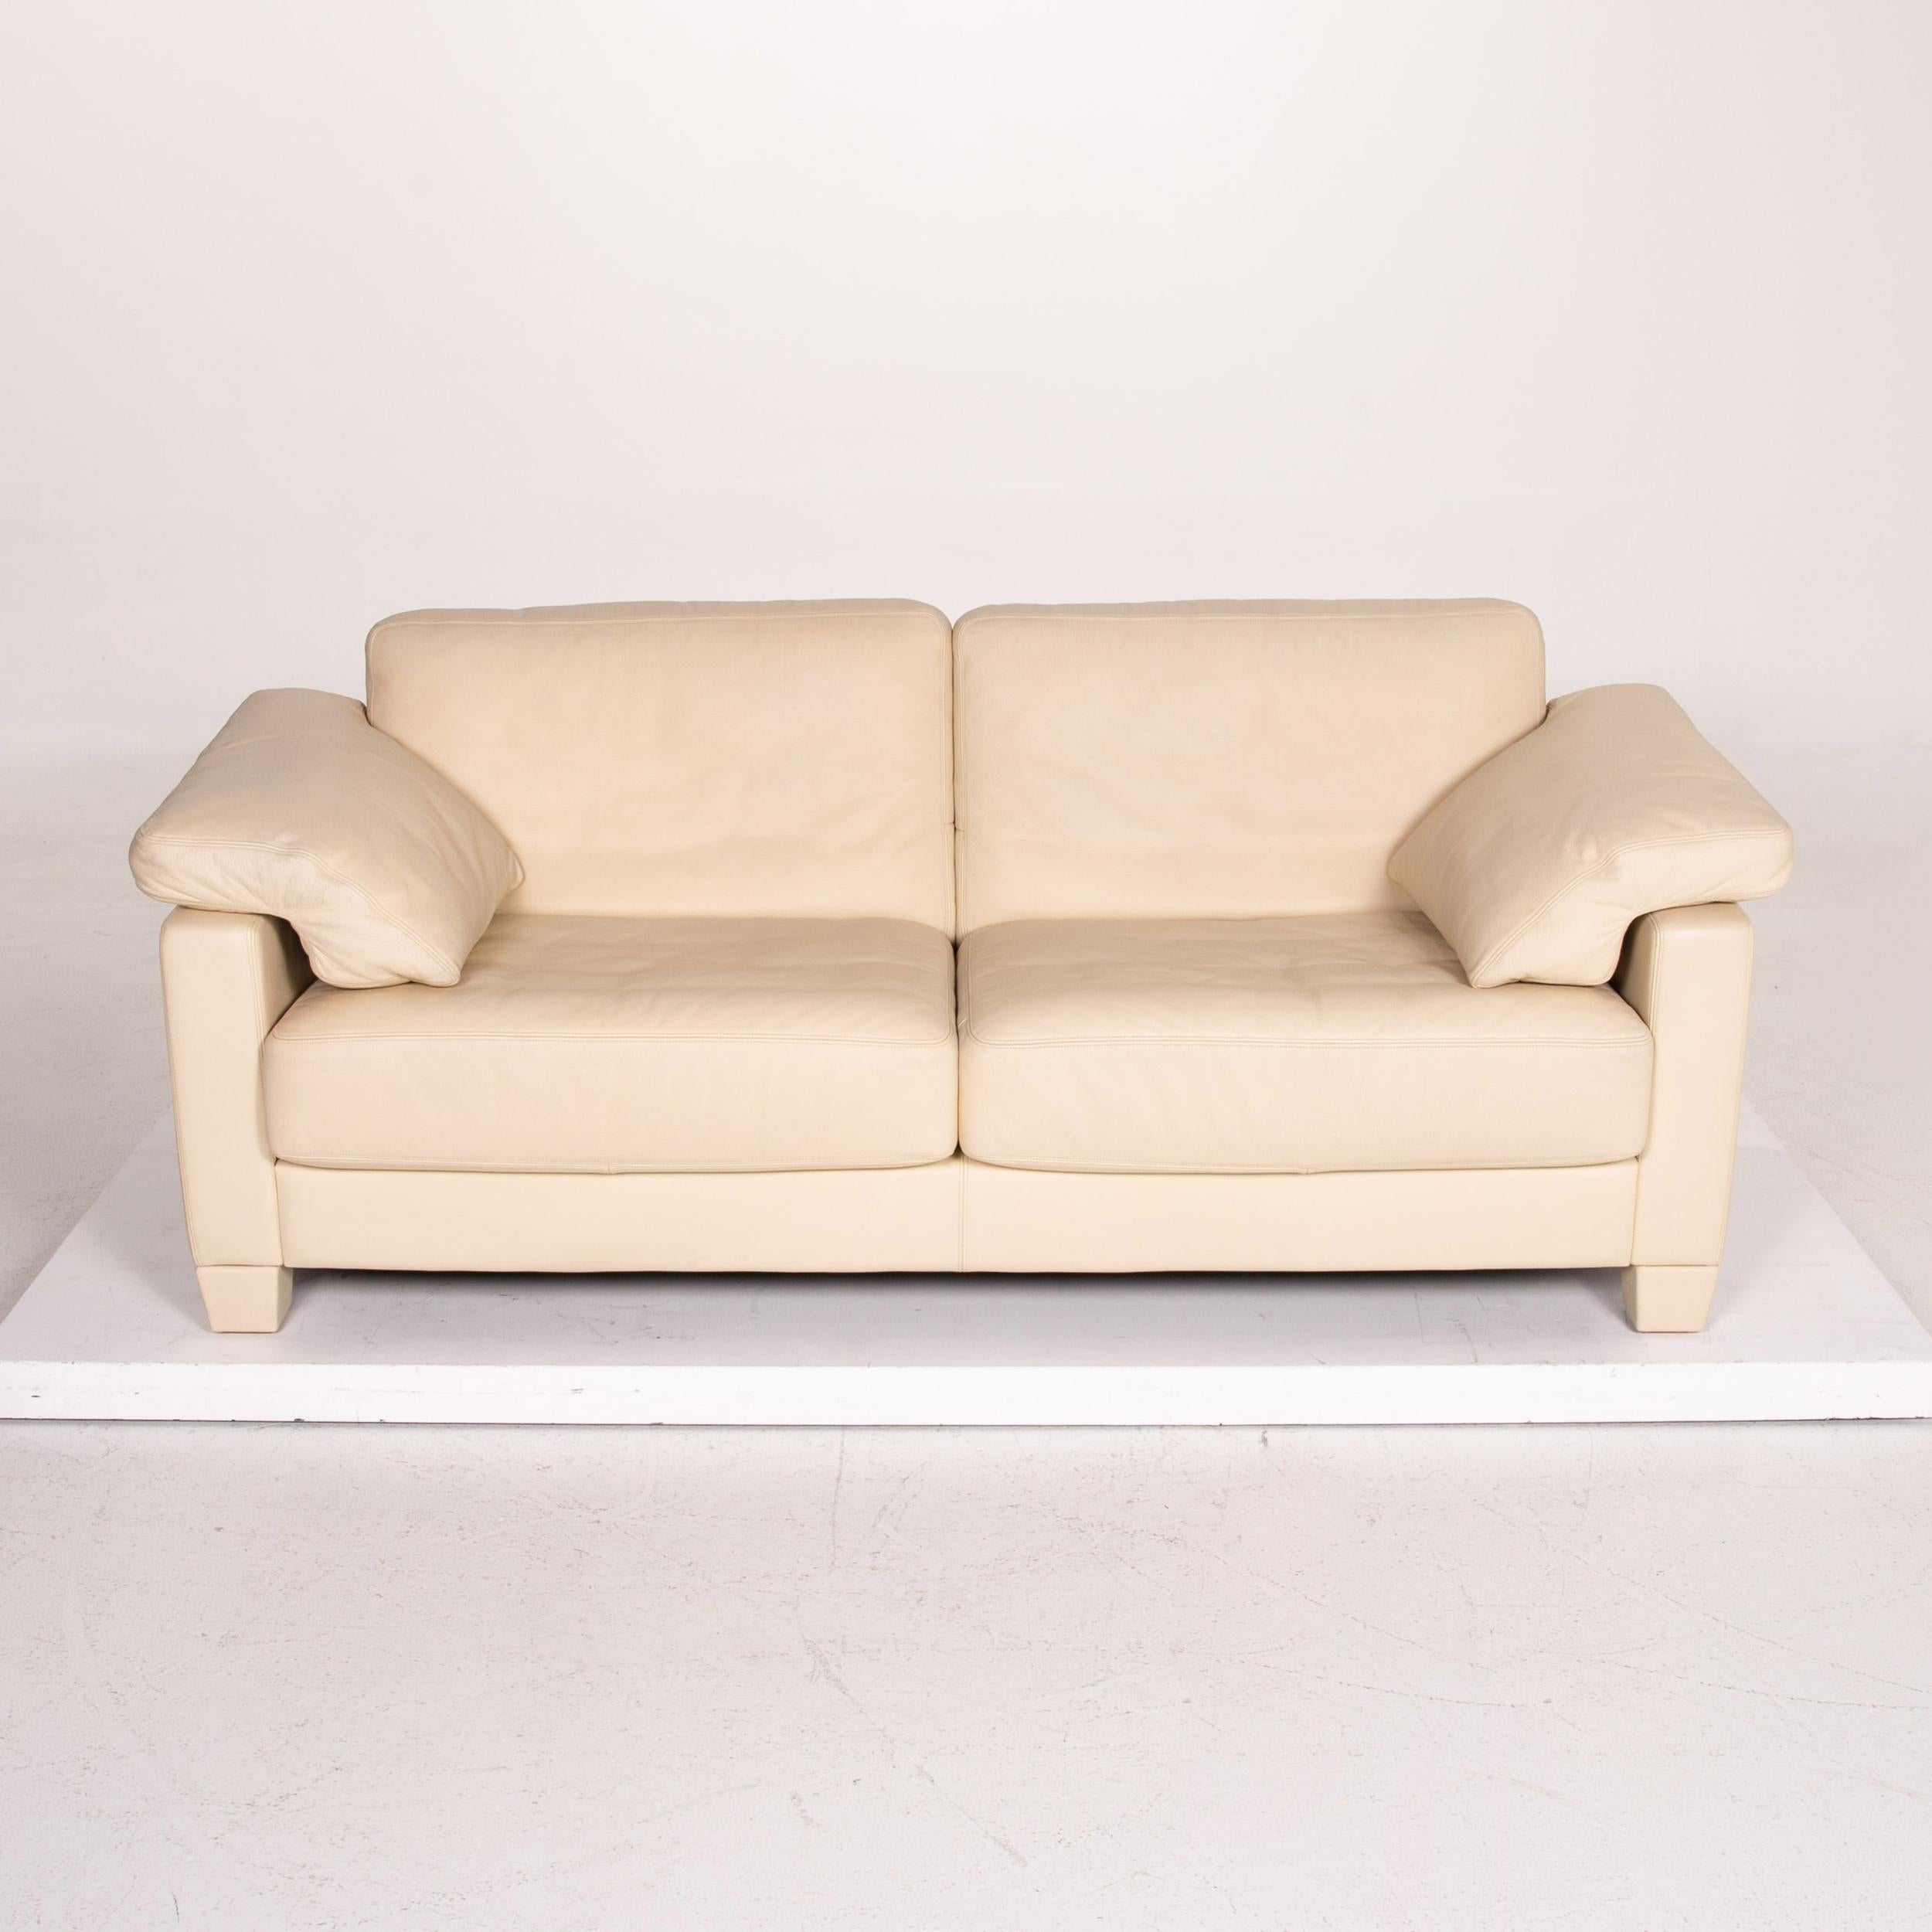 Swiss De Sede Ds 70 Leather Sofa Beige Three-Seat Couch